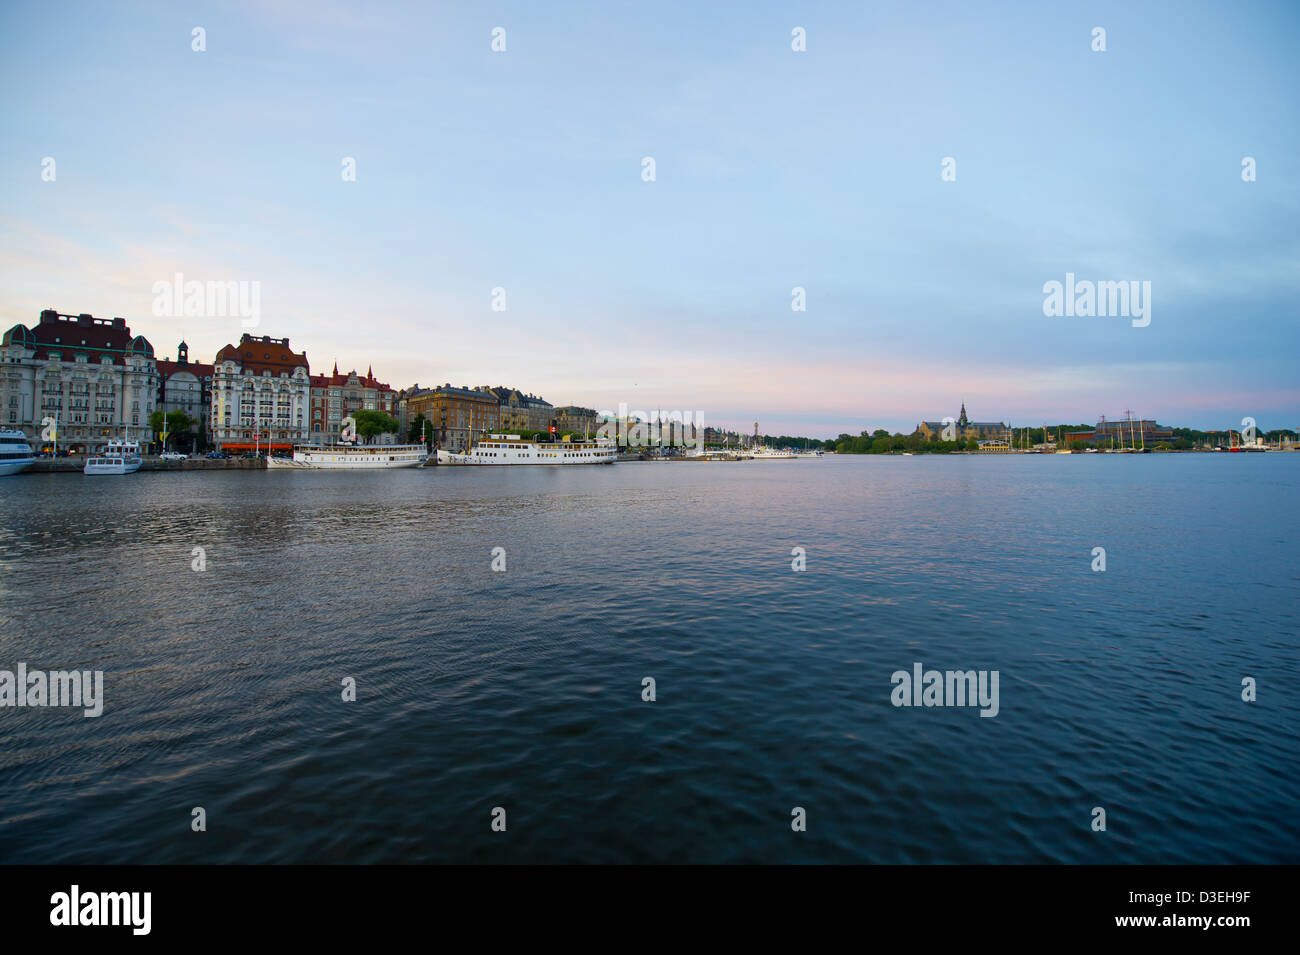 Evening Stockholm. Quay in the city center Stock Photo